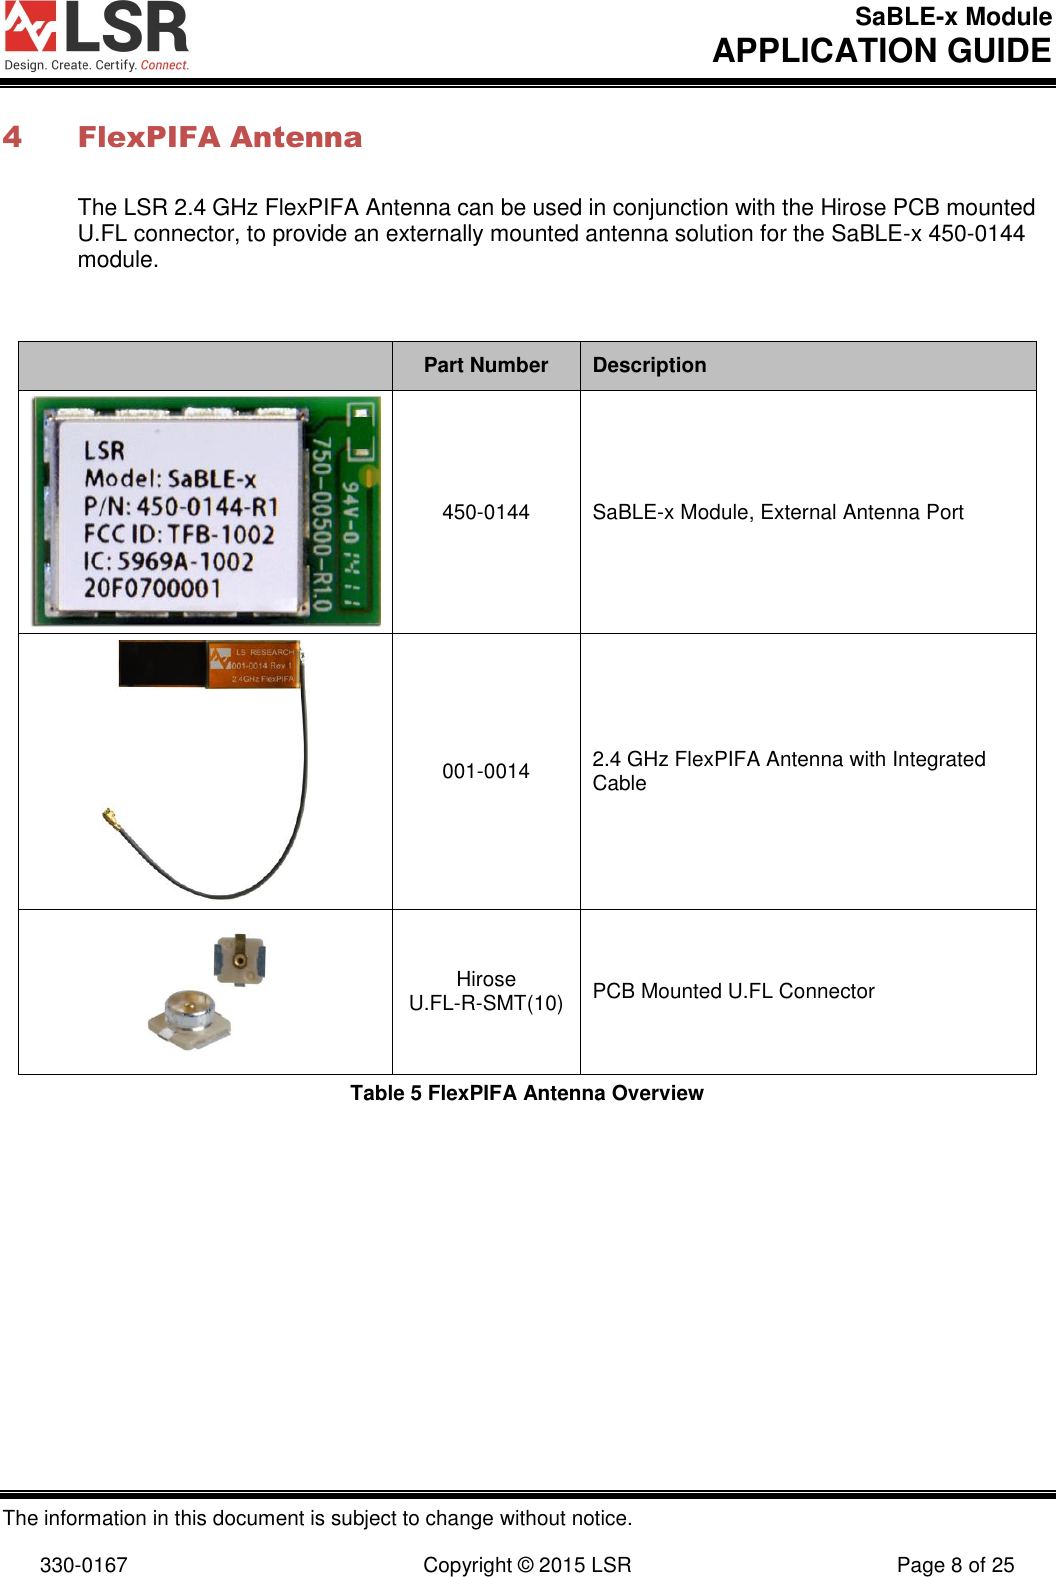 SaBLE-x Module       APPLICATION GUIDE  The information in this document is subject to change without notice.  330-0167  Copyright © 2015 LSR  Page 8 of 25 4 FlexPIFA Antenna The LSR 2.4 GHz FlexPIFA Antenna can be used in conjunction with the Hirose PCB mounted U.FL connector, to provide an externally mounted antenna solution for the SaBLE-x 450-0144 module.   Part Number Description  450-0144 SaBLE-x Module, External Antenna Port  001-0014 2.4 GHz FlexPIFA Antenna with Integrated Cable  Hirose  U.FL-R-SMT(10) PCB Mounted U.FL Connector Table 5 FlexPIFA Antenna Overview   